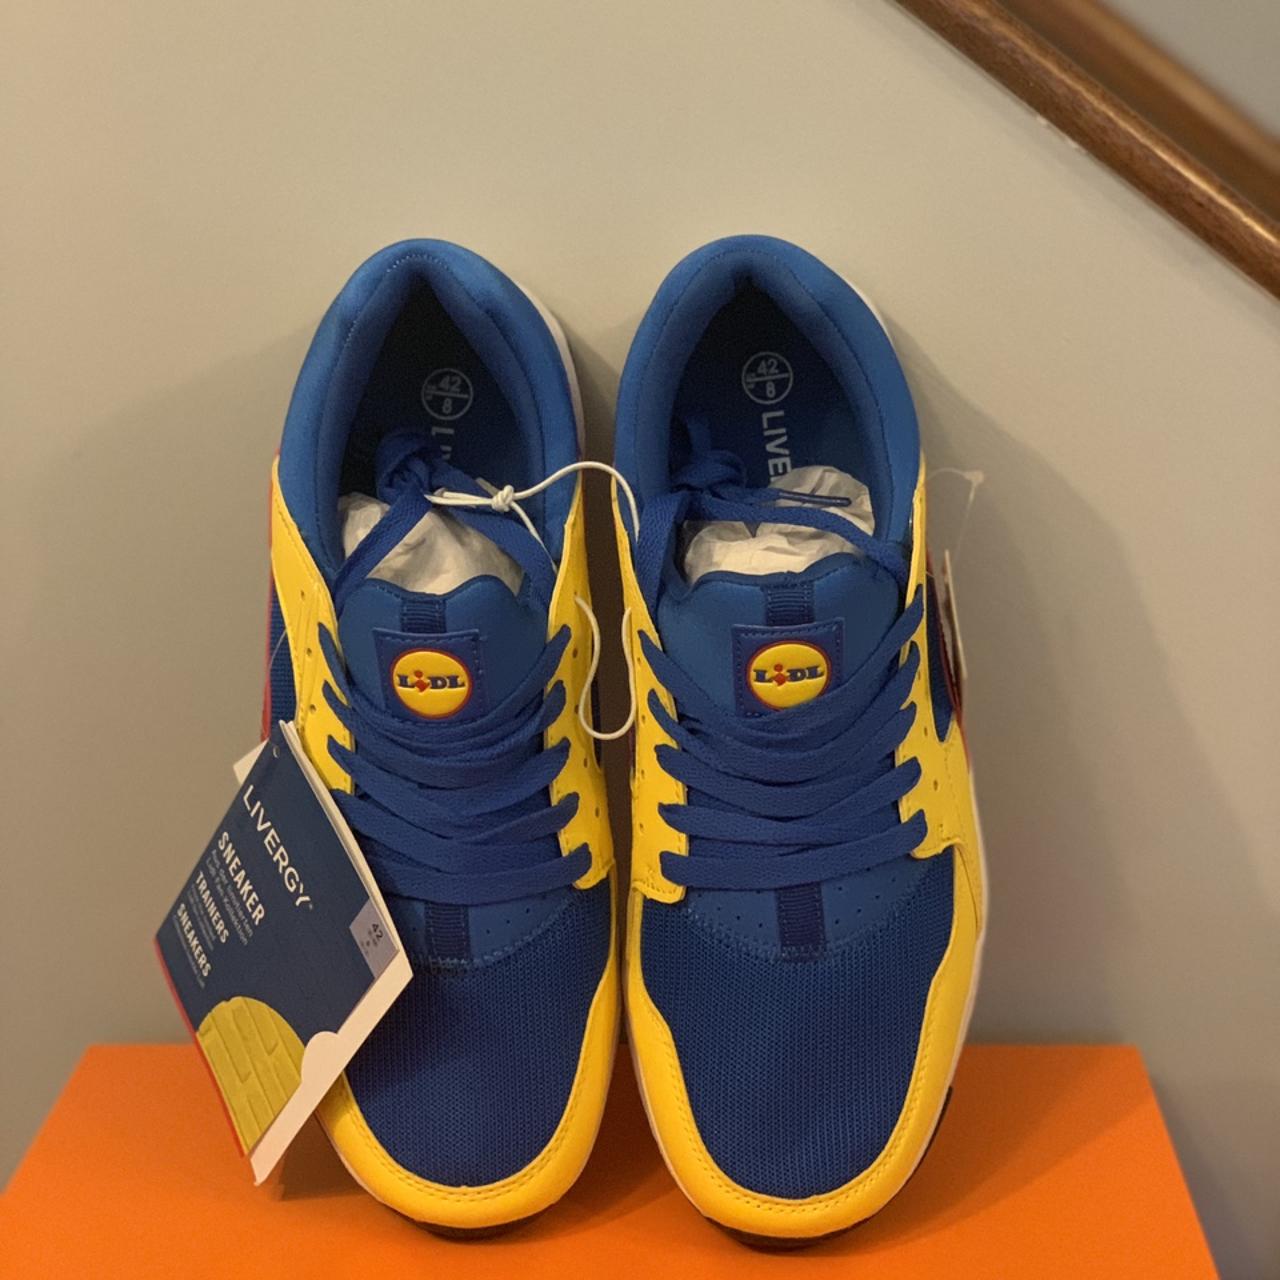 Lidl Trainers Rare Limited Edition Sneakers Shoes Size NEW UK 8 EU 42